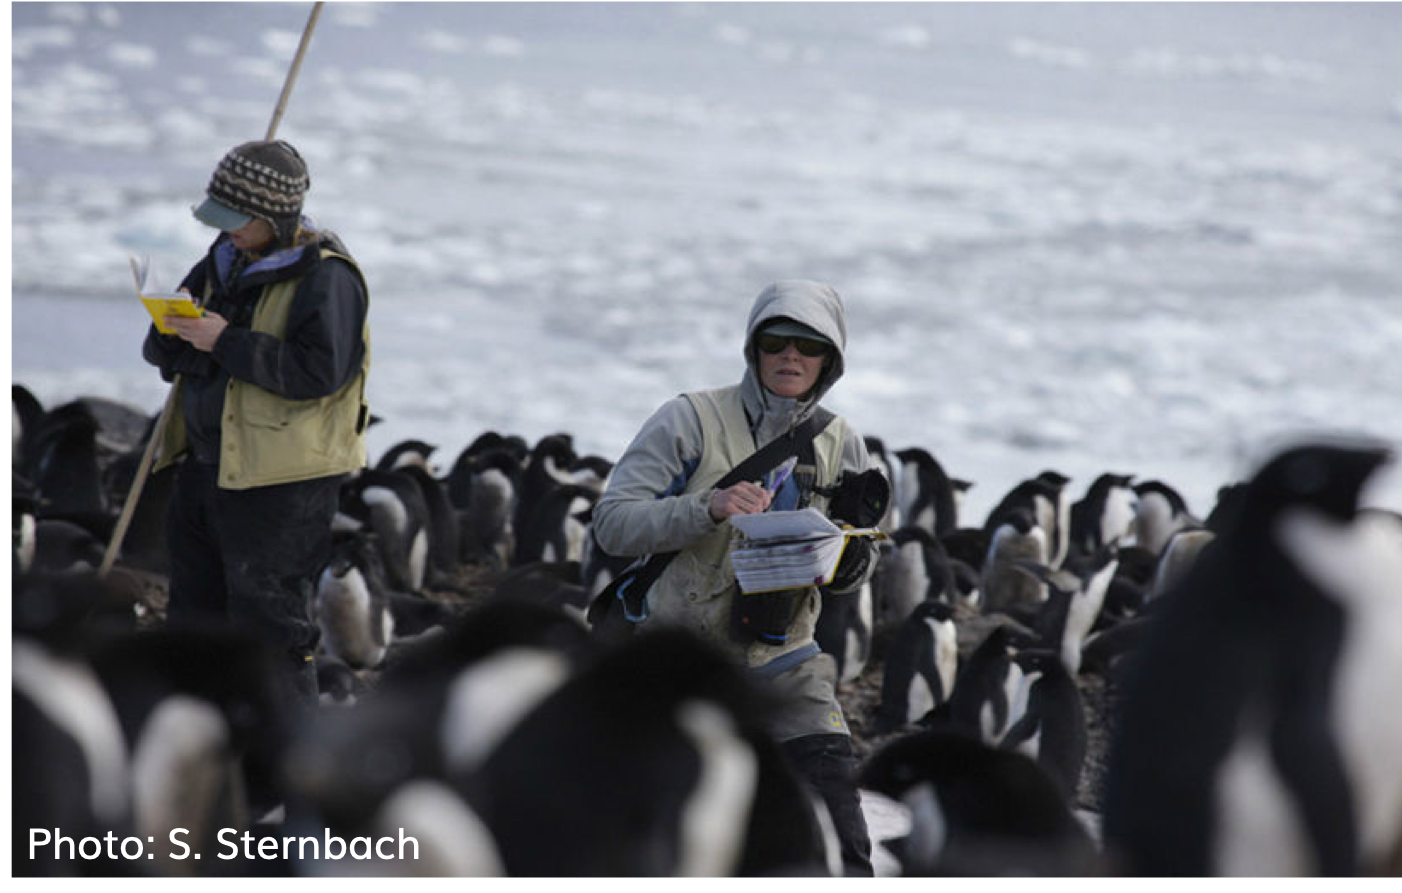 Dr. Gorman recording data in notebook surrounded by penguins.